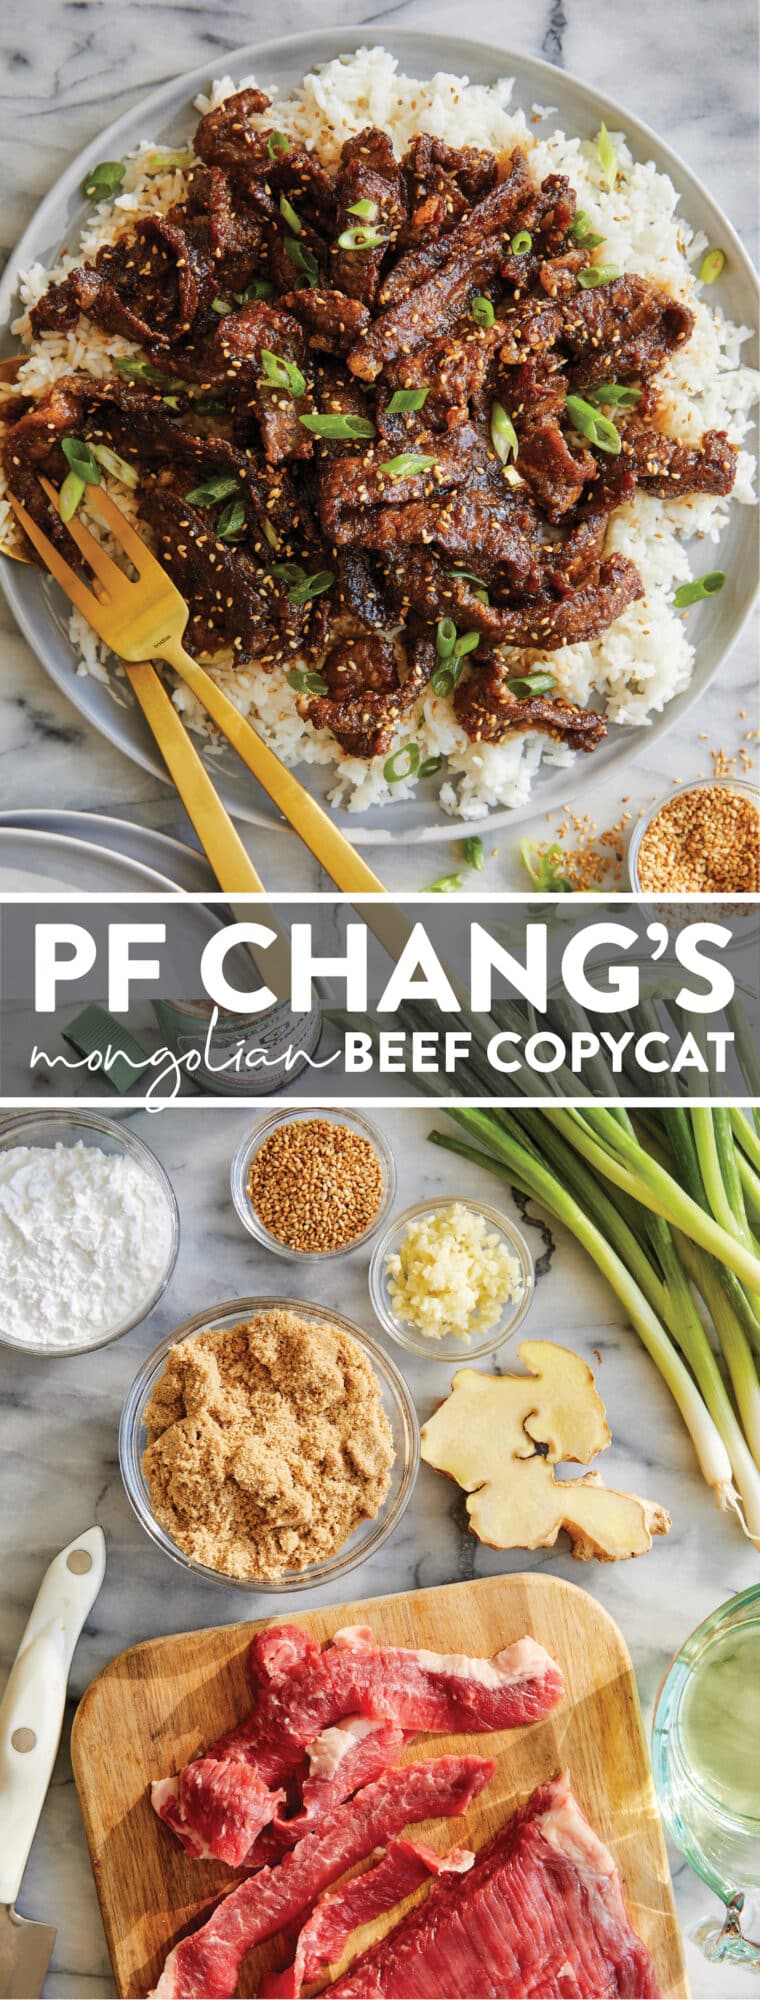 PF Chang’s Mongolian Beef Copycat Recipe - This copycat recipe is so easy to make in 30 min or less (start to finish) and tastes 100x better!